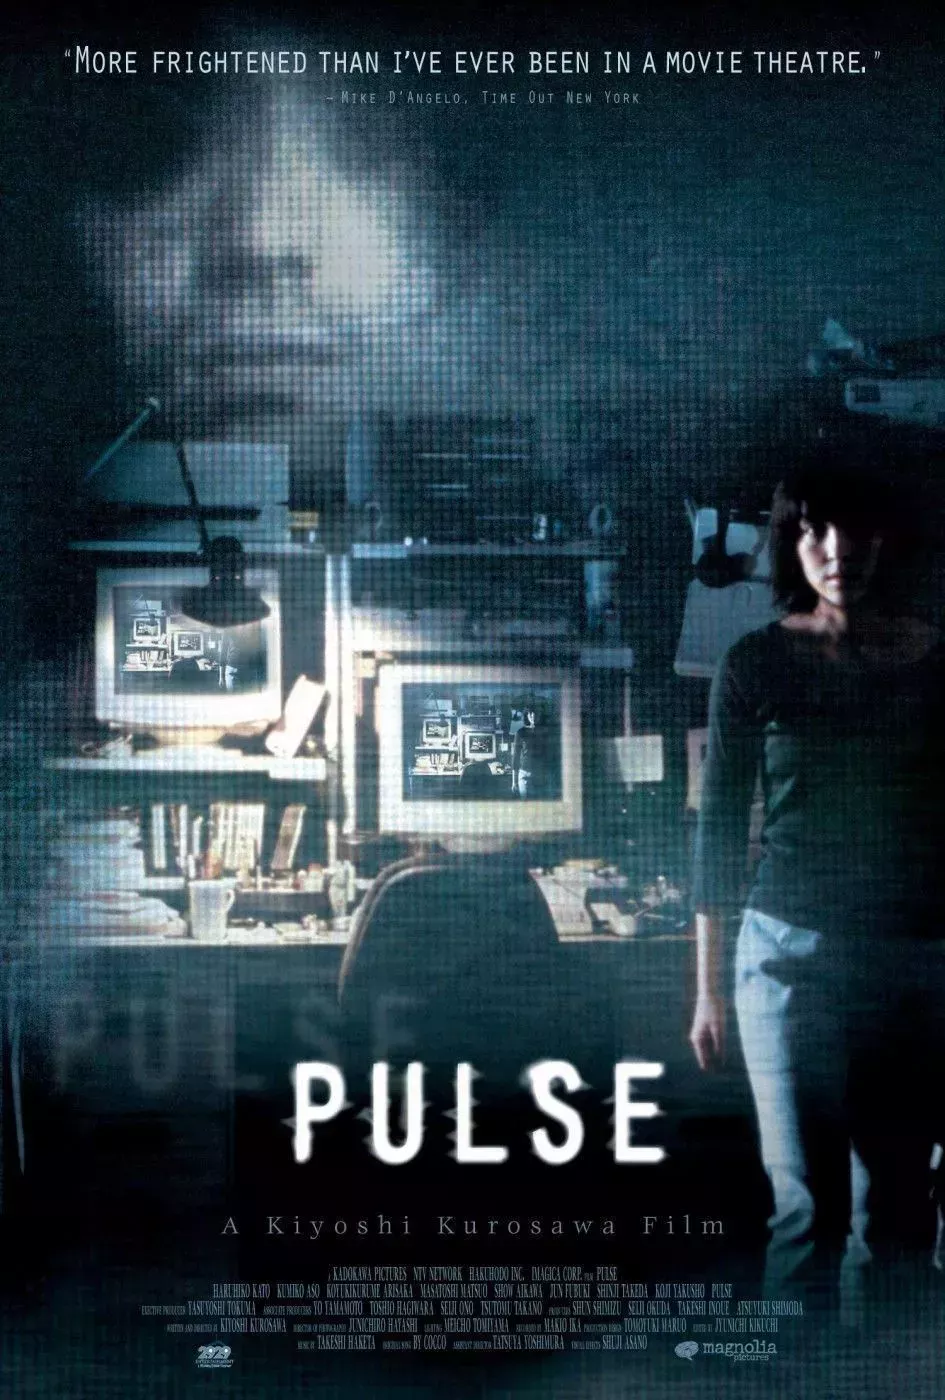 Michi Kudo stands in a grainy image of an office in the movie promo poster for Kairo Pulse